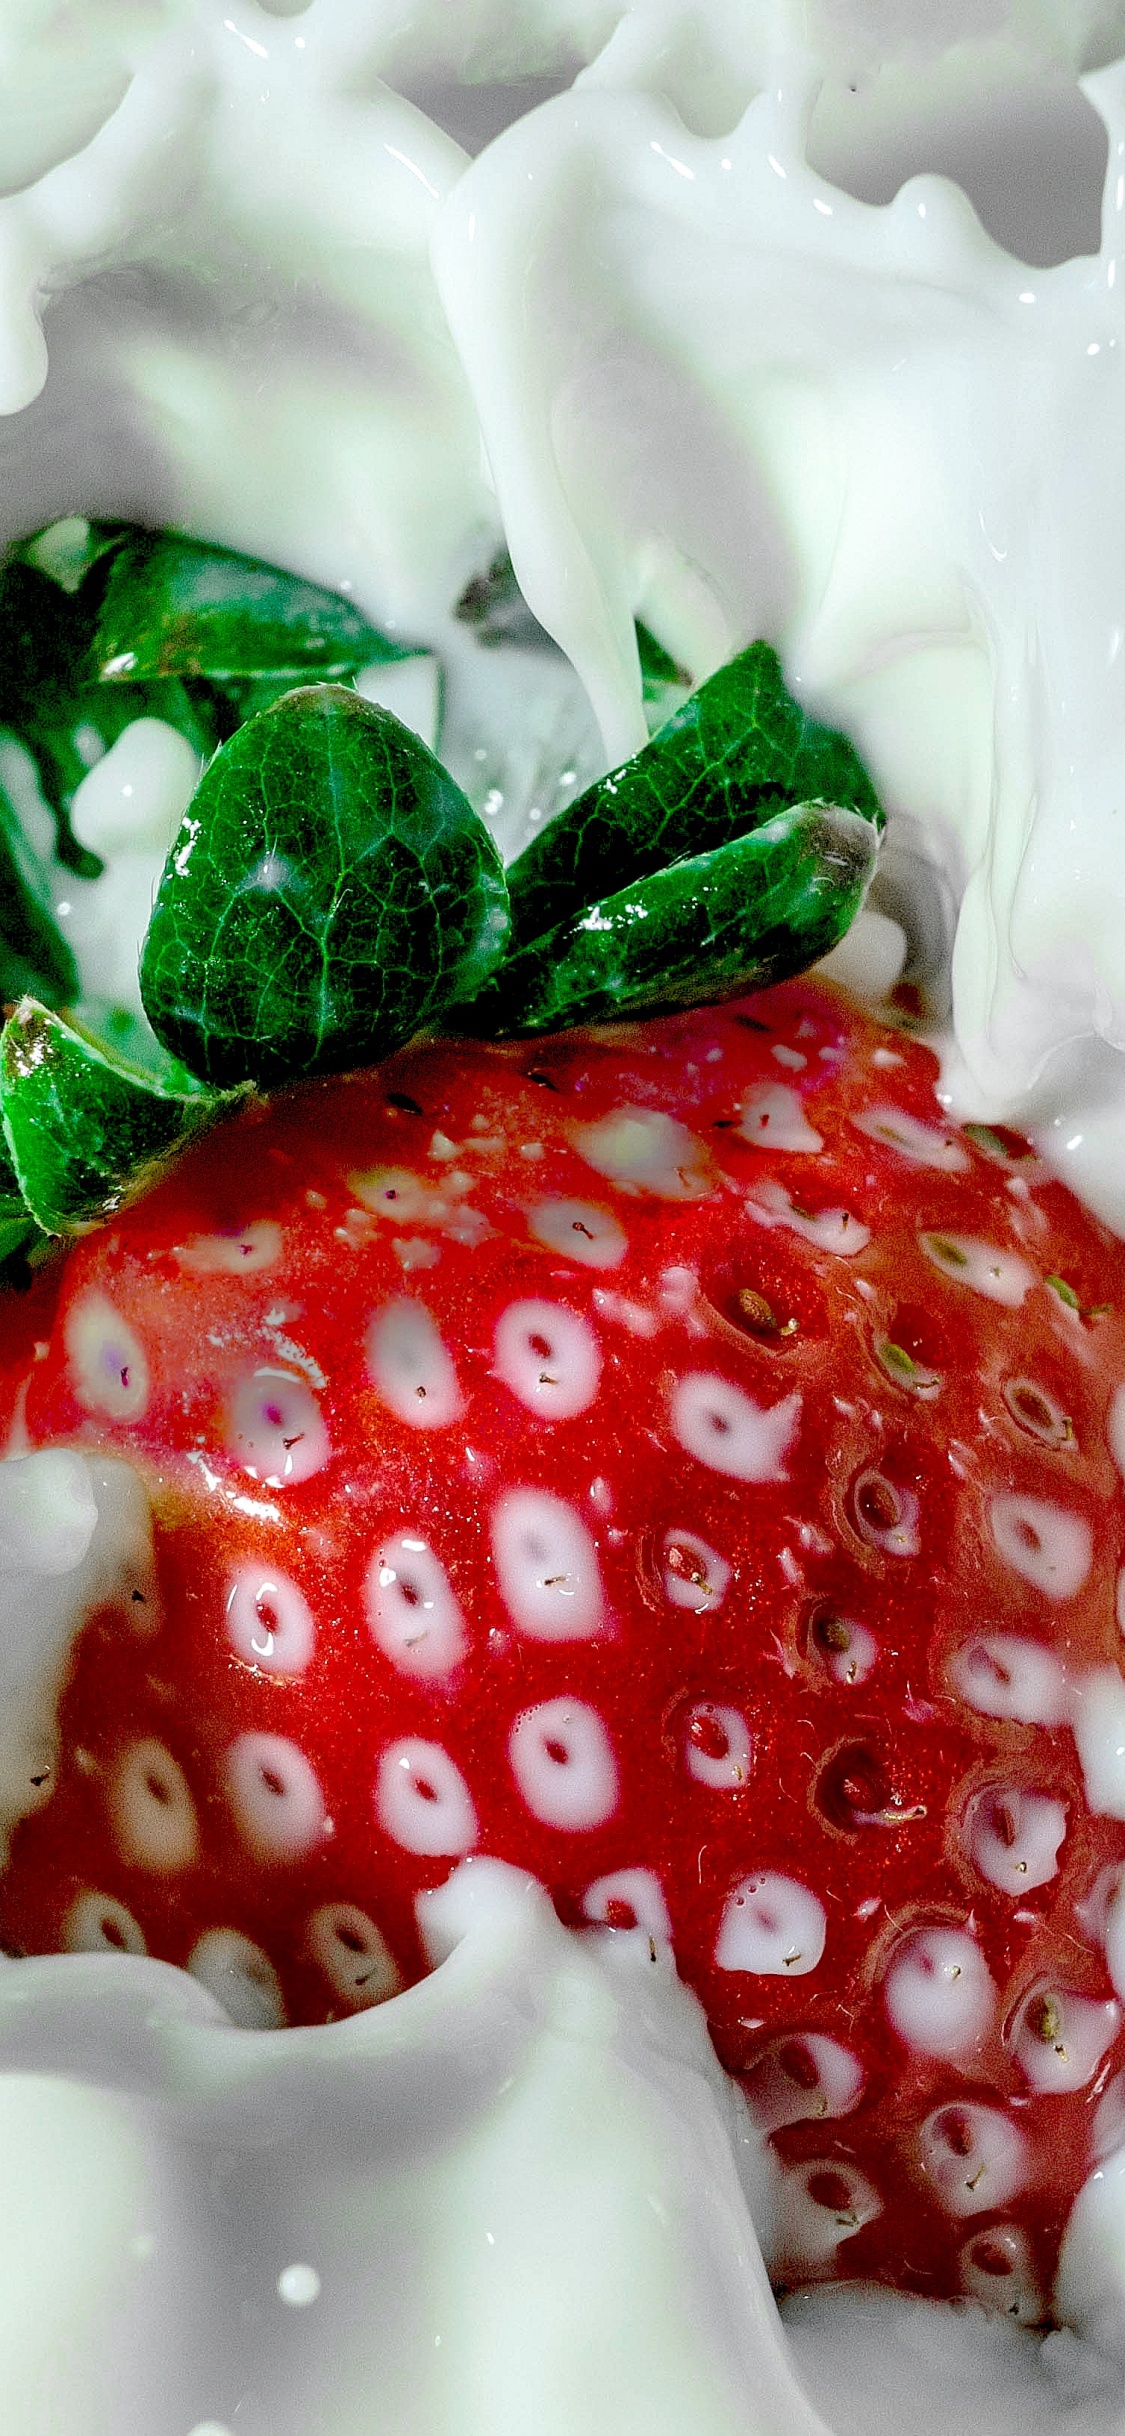 Strawberry on White Ceramic Plate. Wallpaper in 1125x2436 Resolution